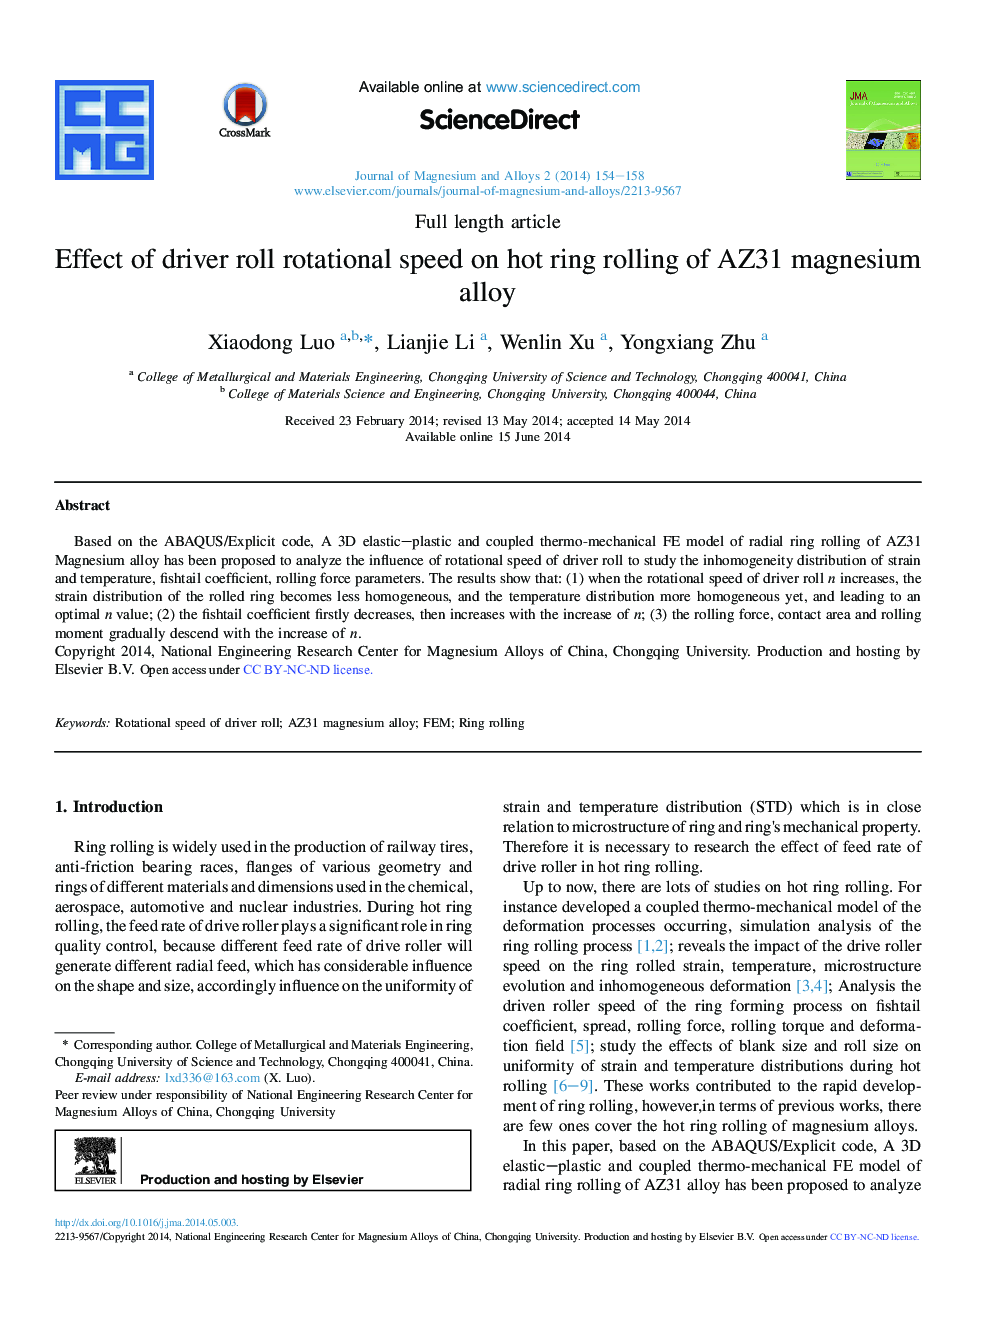 Effect of driver roll rotational speed on hot ring rolling of AZ31 magnesium alloy